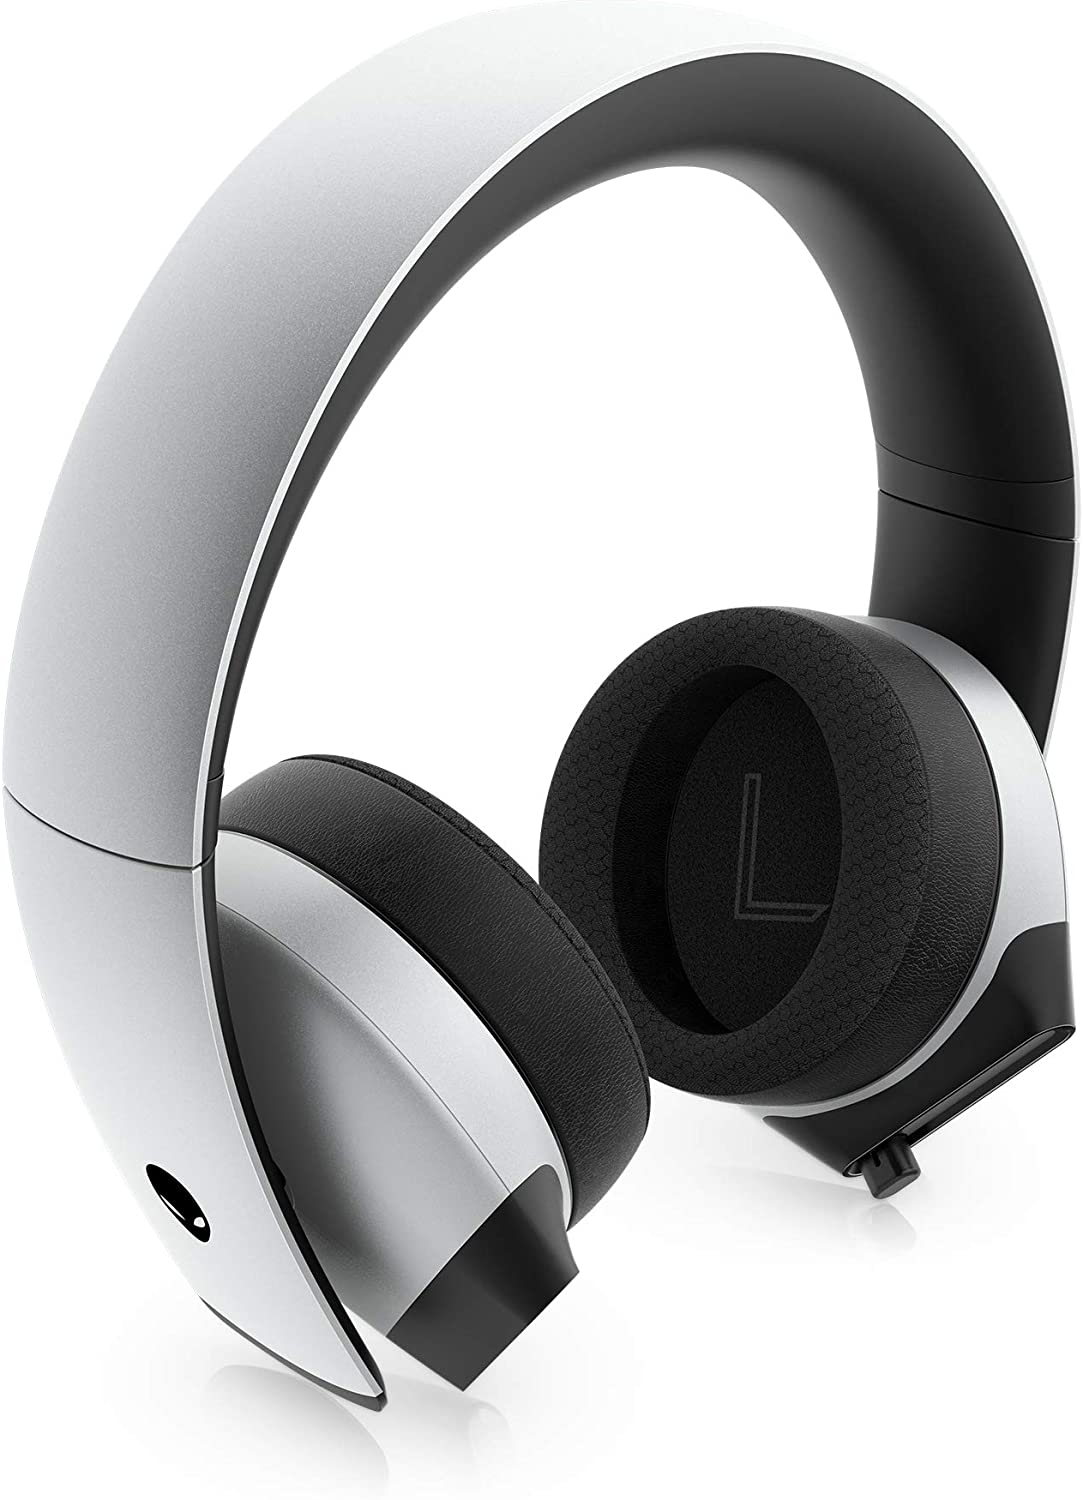 Alienware 7.1 PC Gaming Headset AW510H-Light 50mm Hi-Res Drivers - Noise Cancelling Mic - Multi Platform Compatible(PS4,Xbox One,Switch) via 3.5mm Jack, Gray